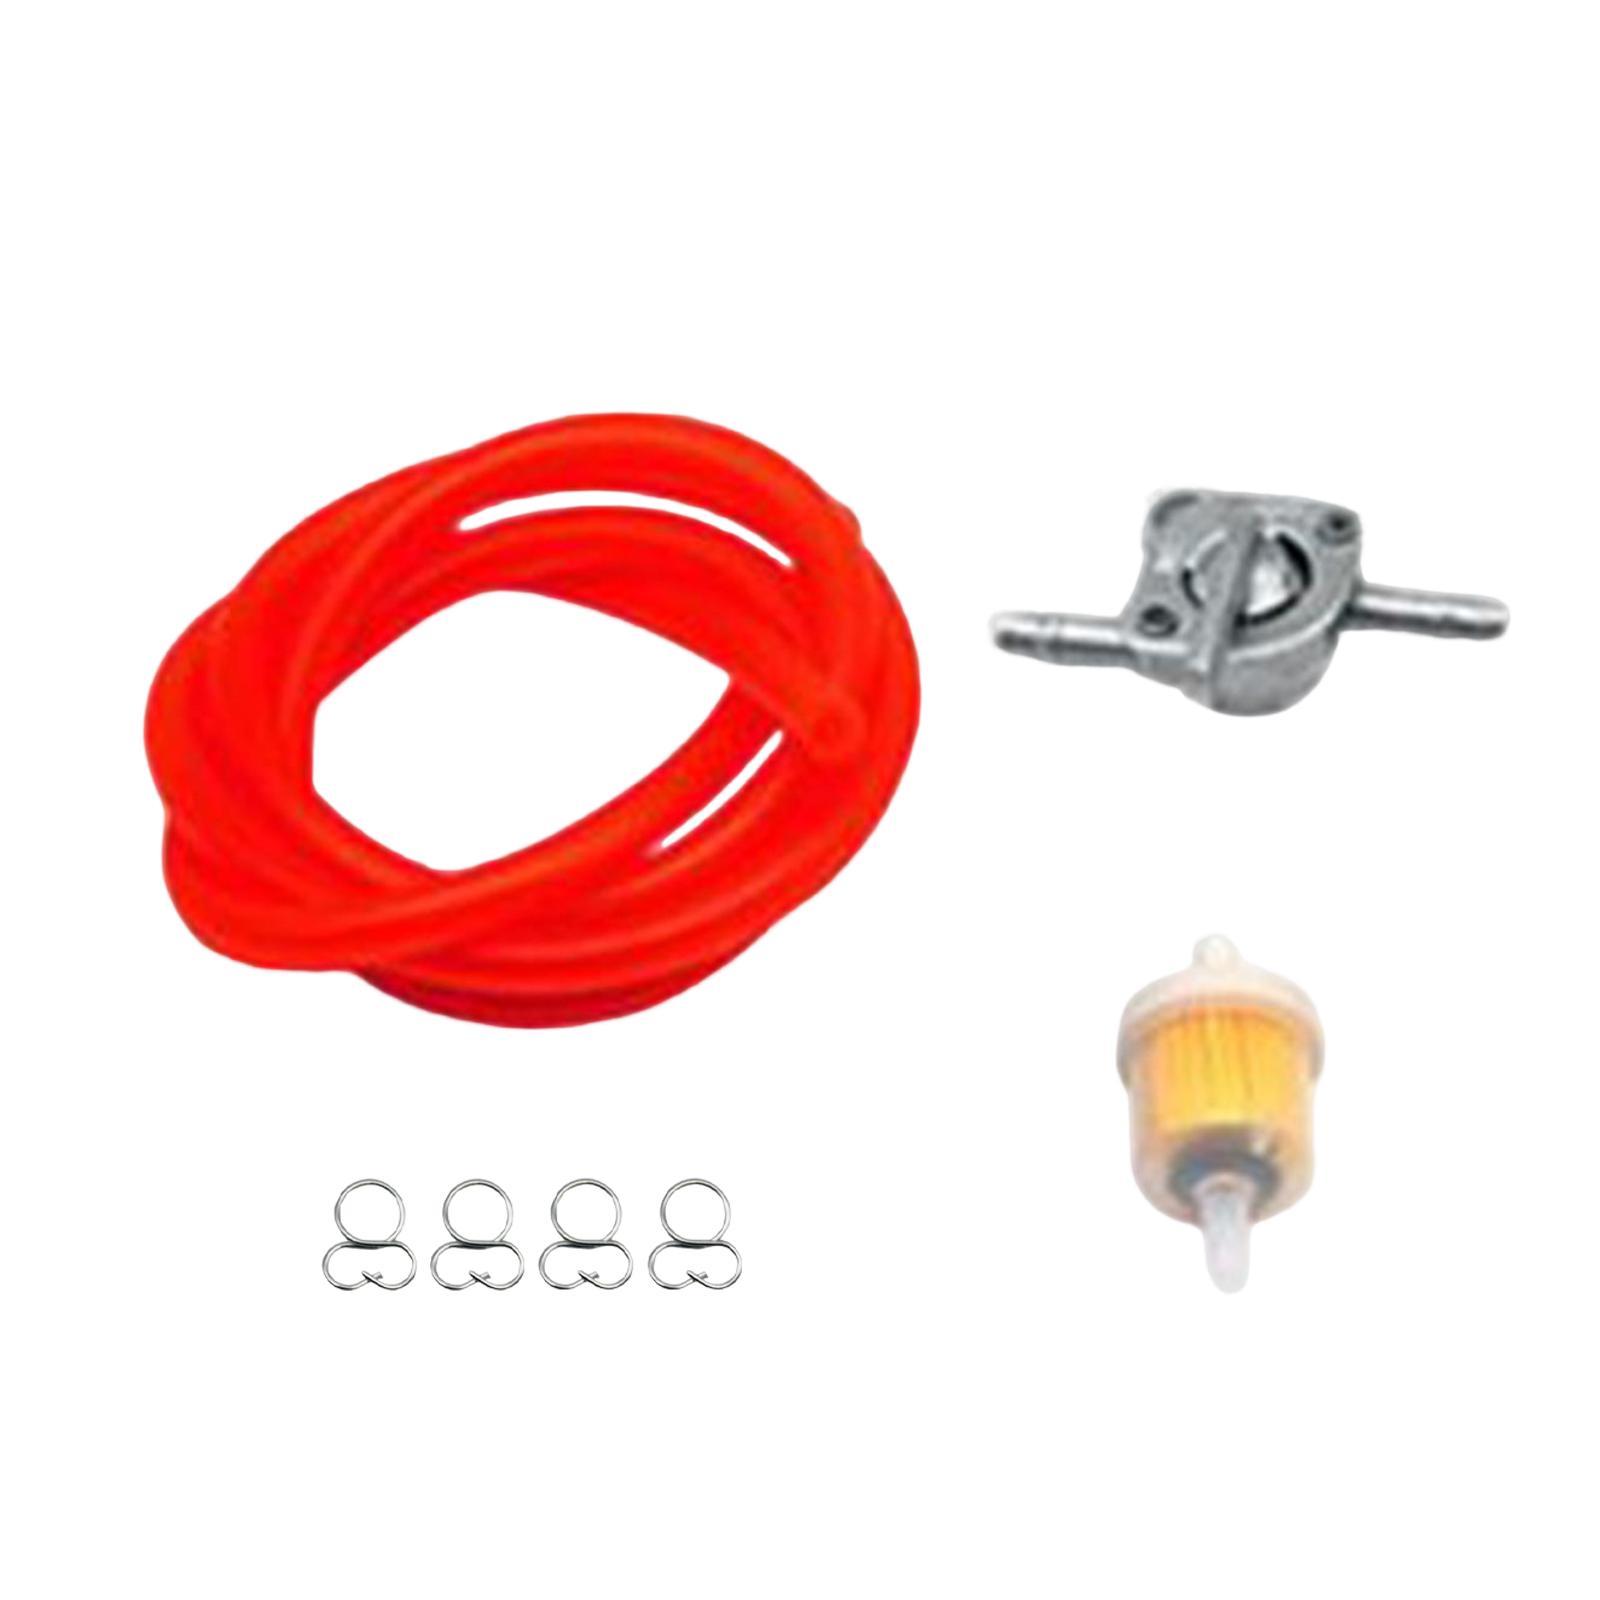 Professional Gas Fuel Switch with Filter Fuel Line for Motorcycle